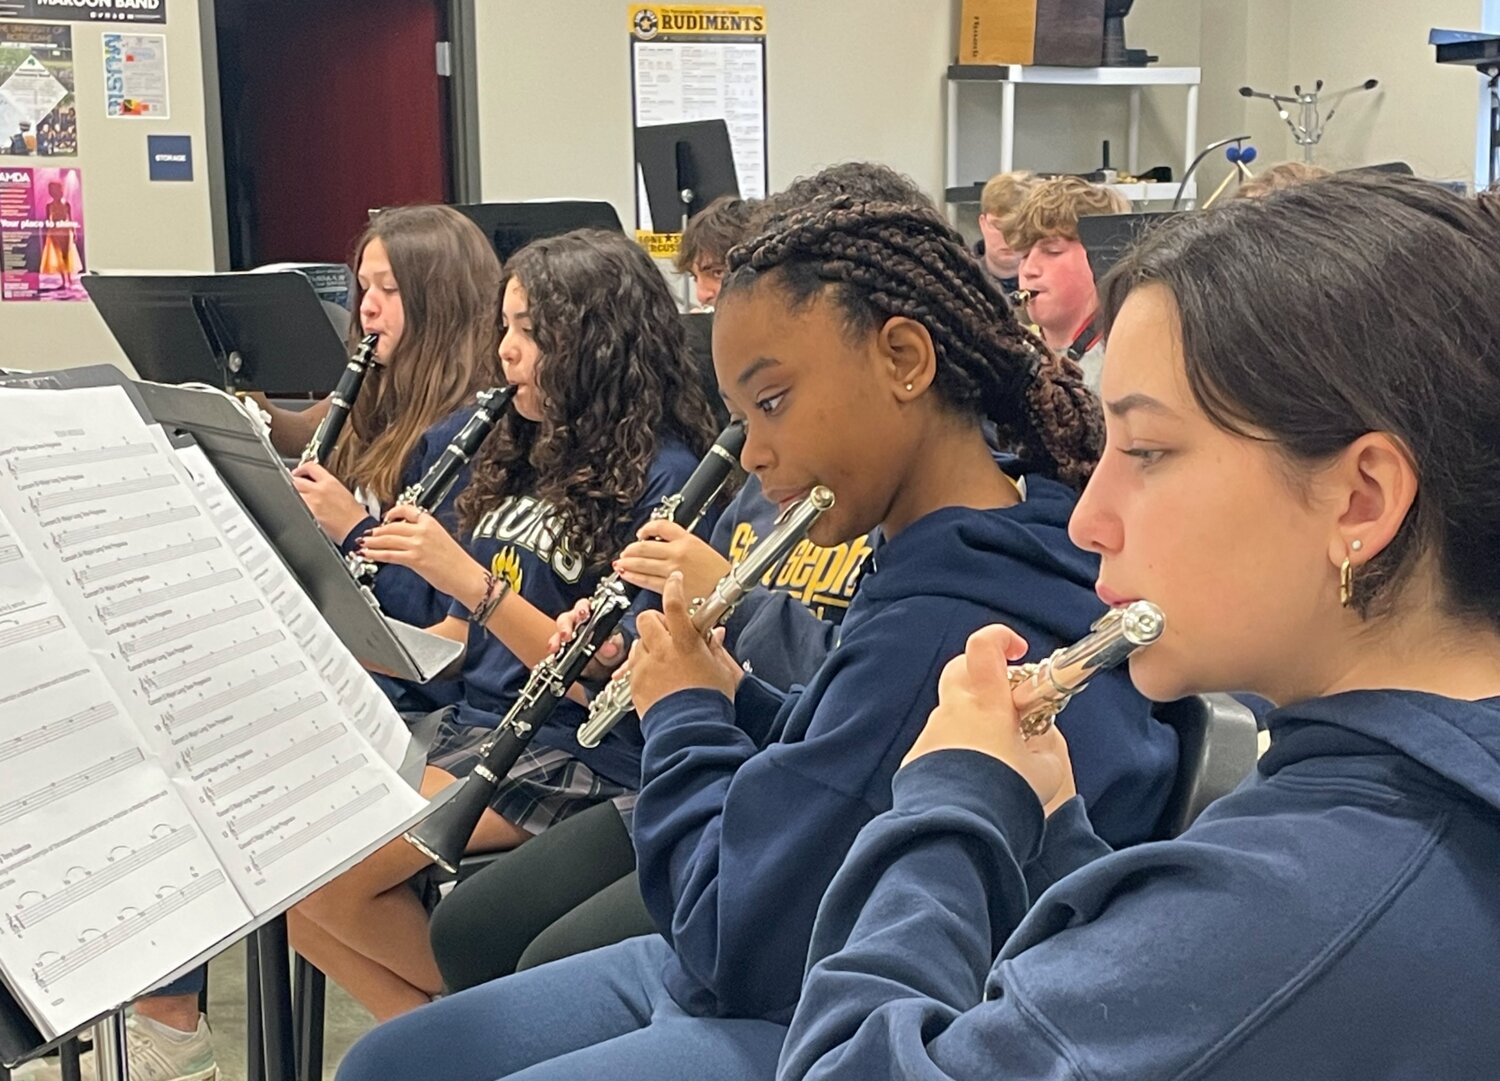 Student musicians practice for St. Joseph Catholic School’s annual “Gifts of the Season” Christmas concert. The concert is 2 p.m. Sunday, Dec. 10, in the school Fine Arts auditorium, 308 New Mannsdale Road, about one mile west of the Interstate 55-Mississippi 463 interchange. Admission is free, but guests are asked to bring canned goods to help feed those in need. Pictured here are sophomore Talia Ramos, far right, and freshman Mackenzie Maberry rehearsing for “Gifts of the Season.”